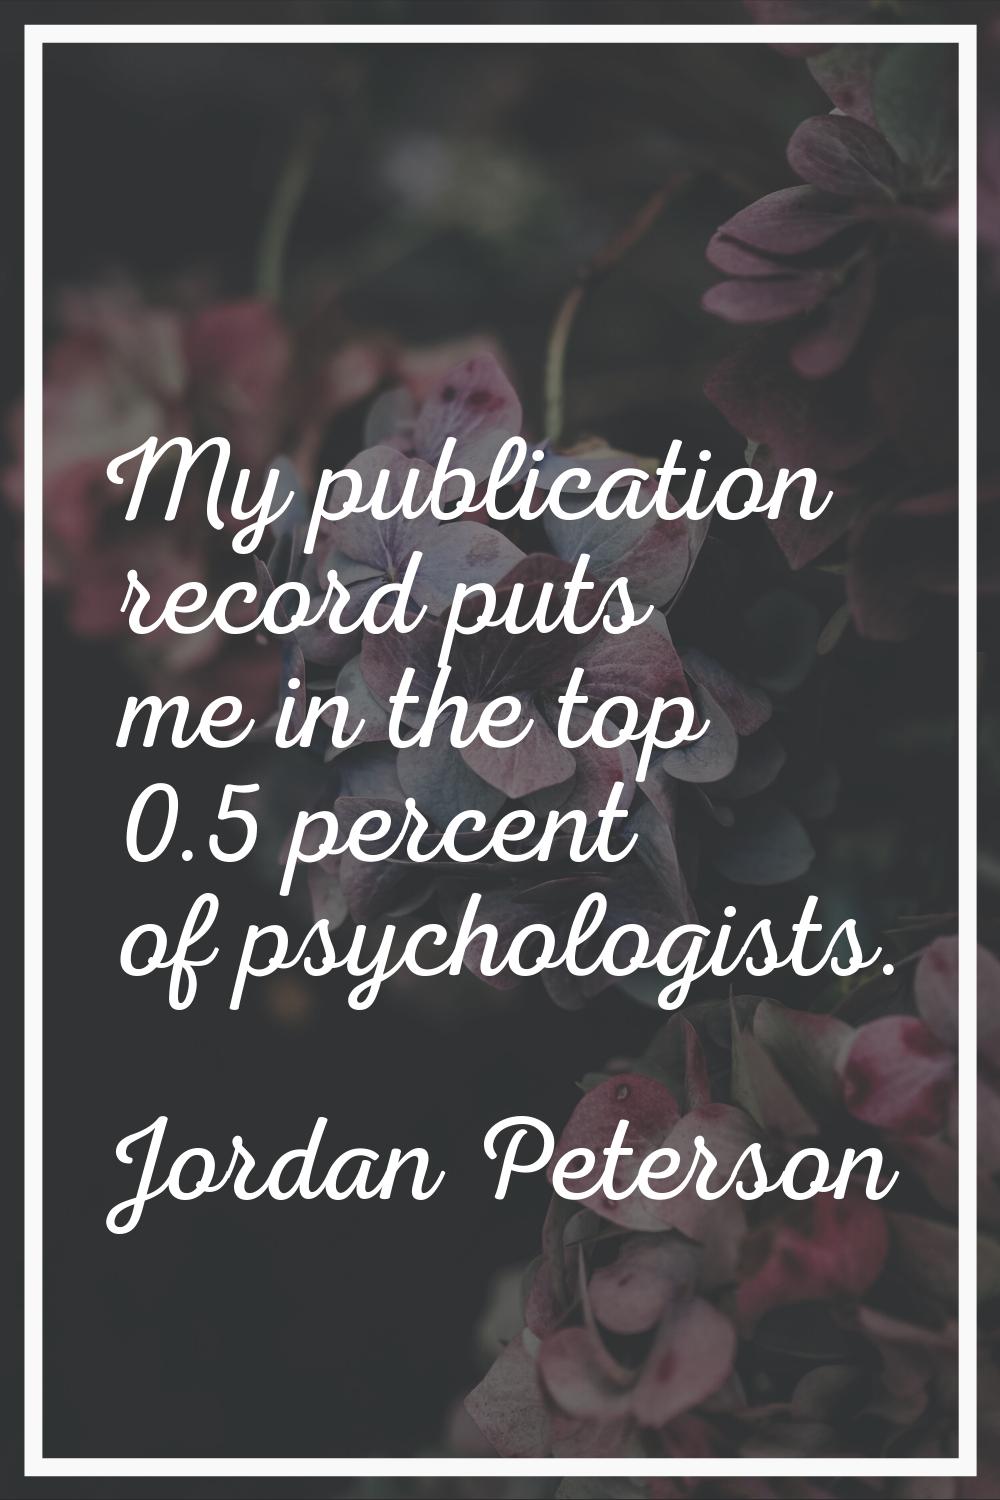 My publication record puts me in the top 0.5 percent of psychologists.